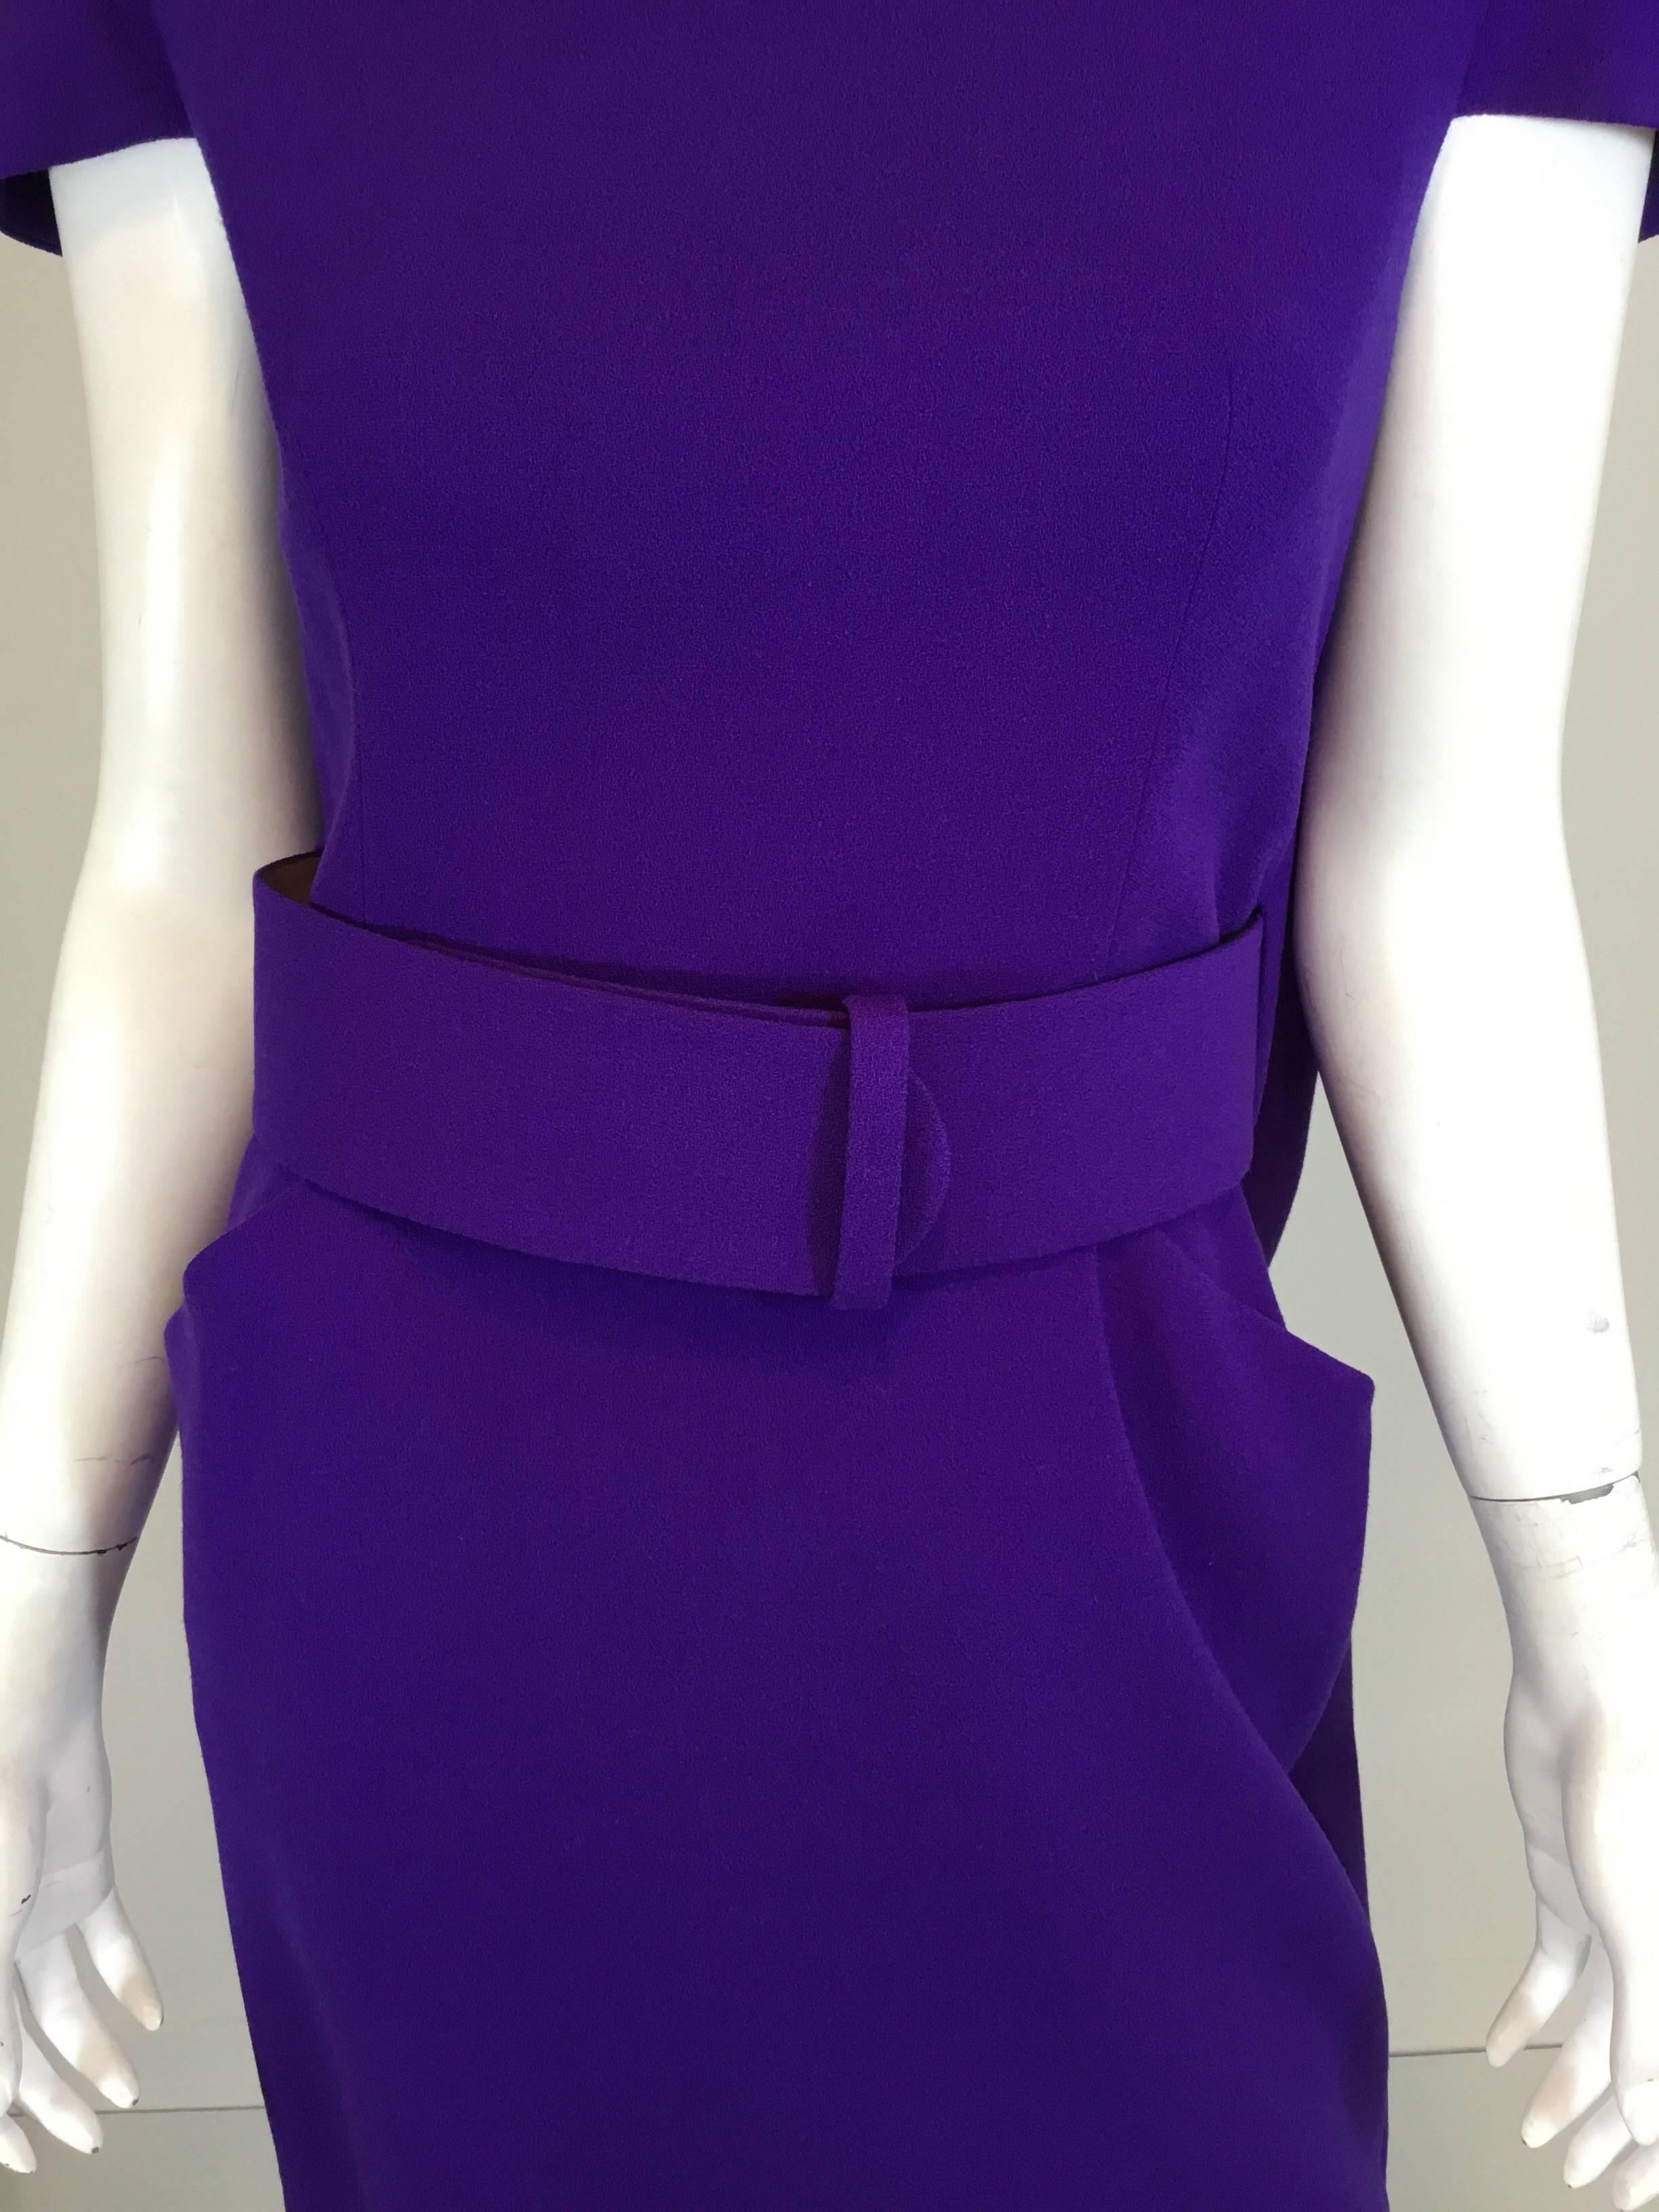 Alexander McQueen purple wool crepe dress features a belted waist (with a snap closure), pockets at the hips, capped sleeves, and a cape design at the back with a zipper fastening. Dress is fully lined, constructed with 100% wool and is made in